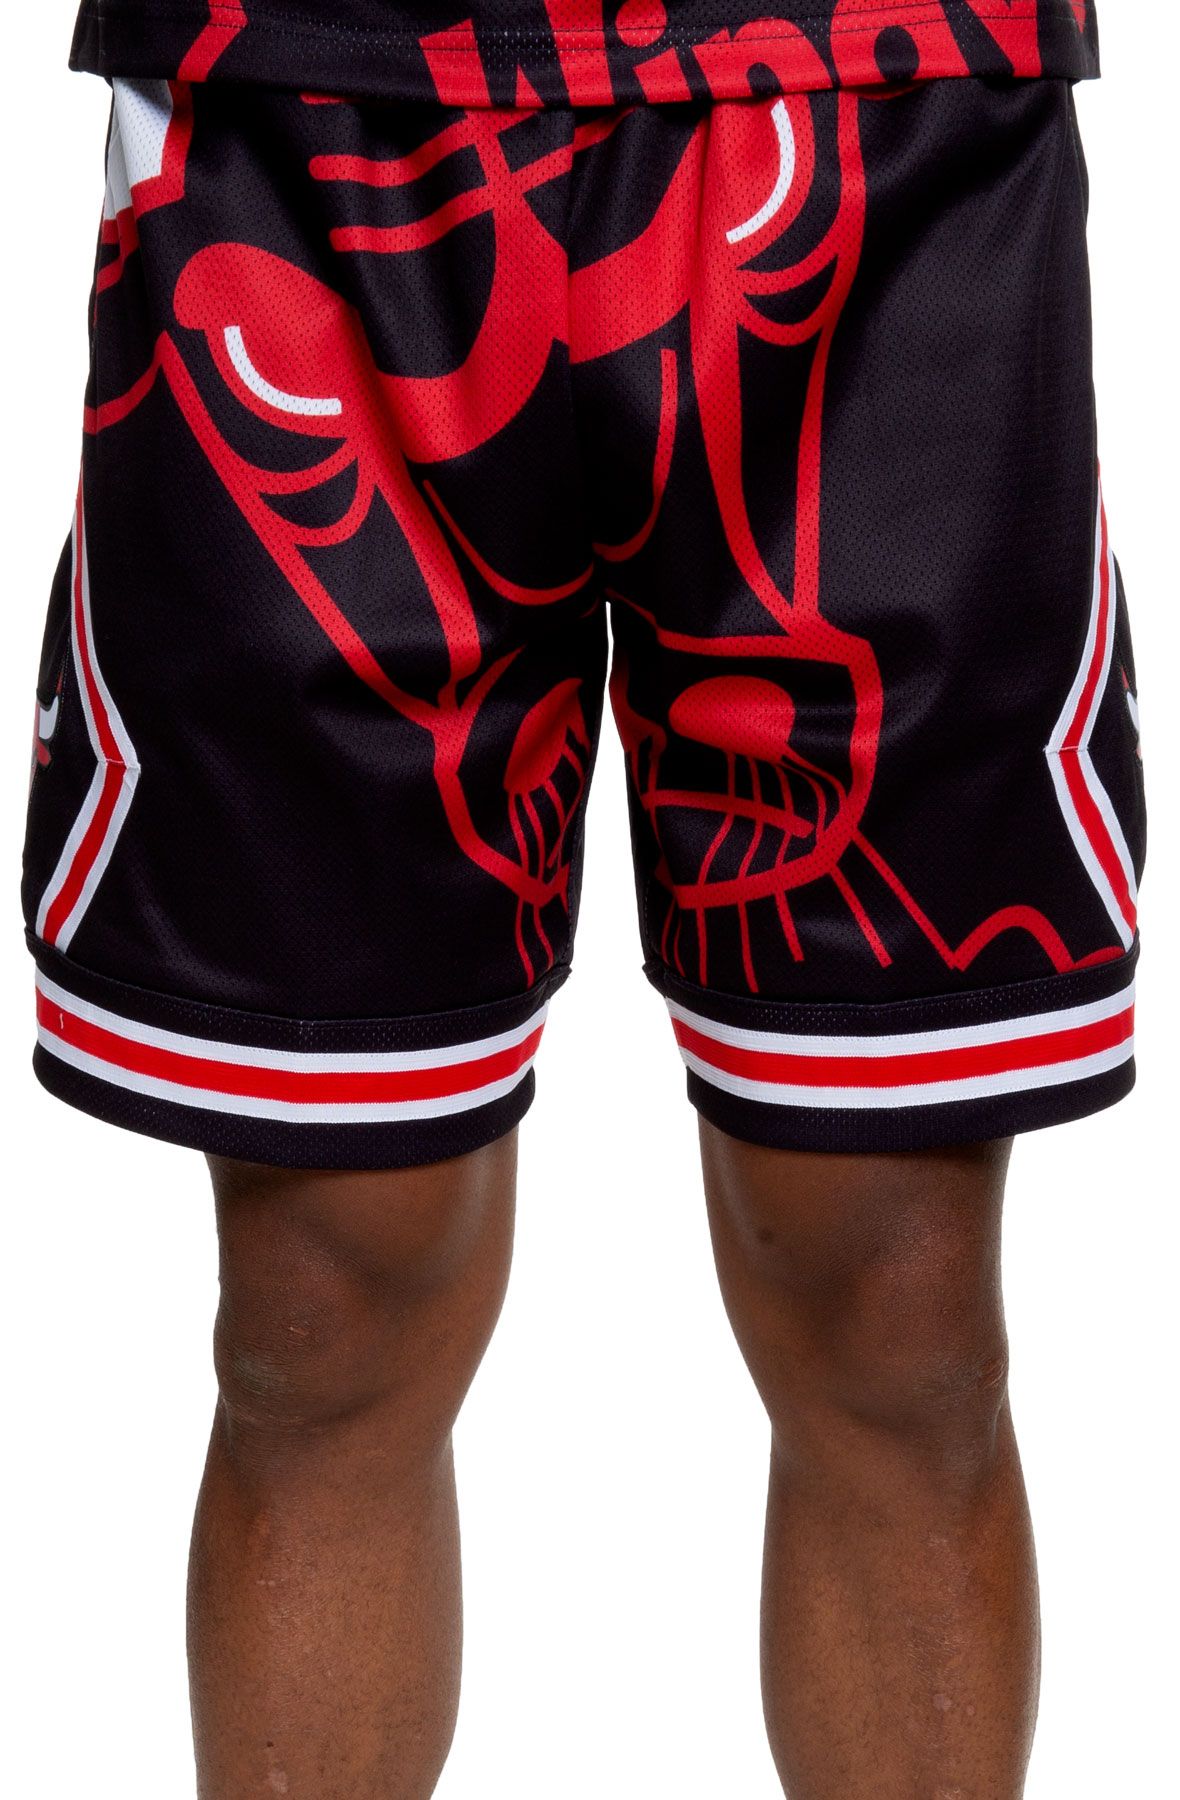 Mitchell & Ness RED Big Face Chicago Bulls India